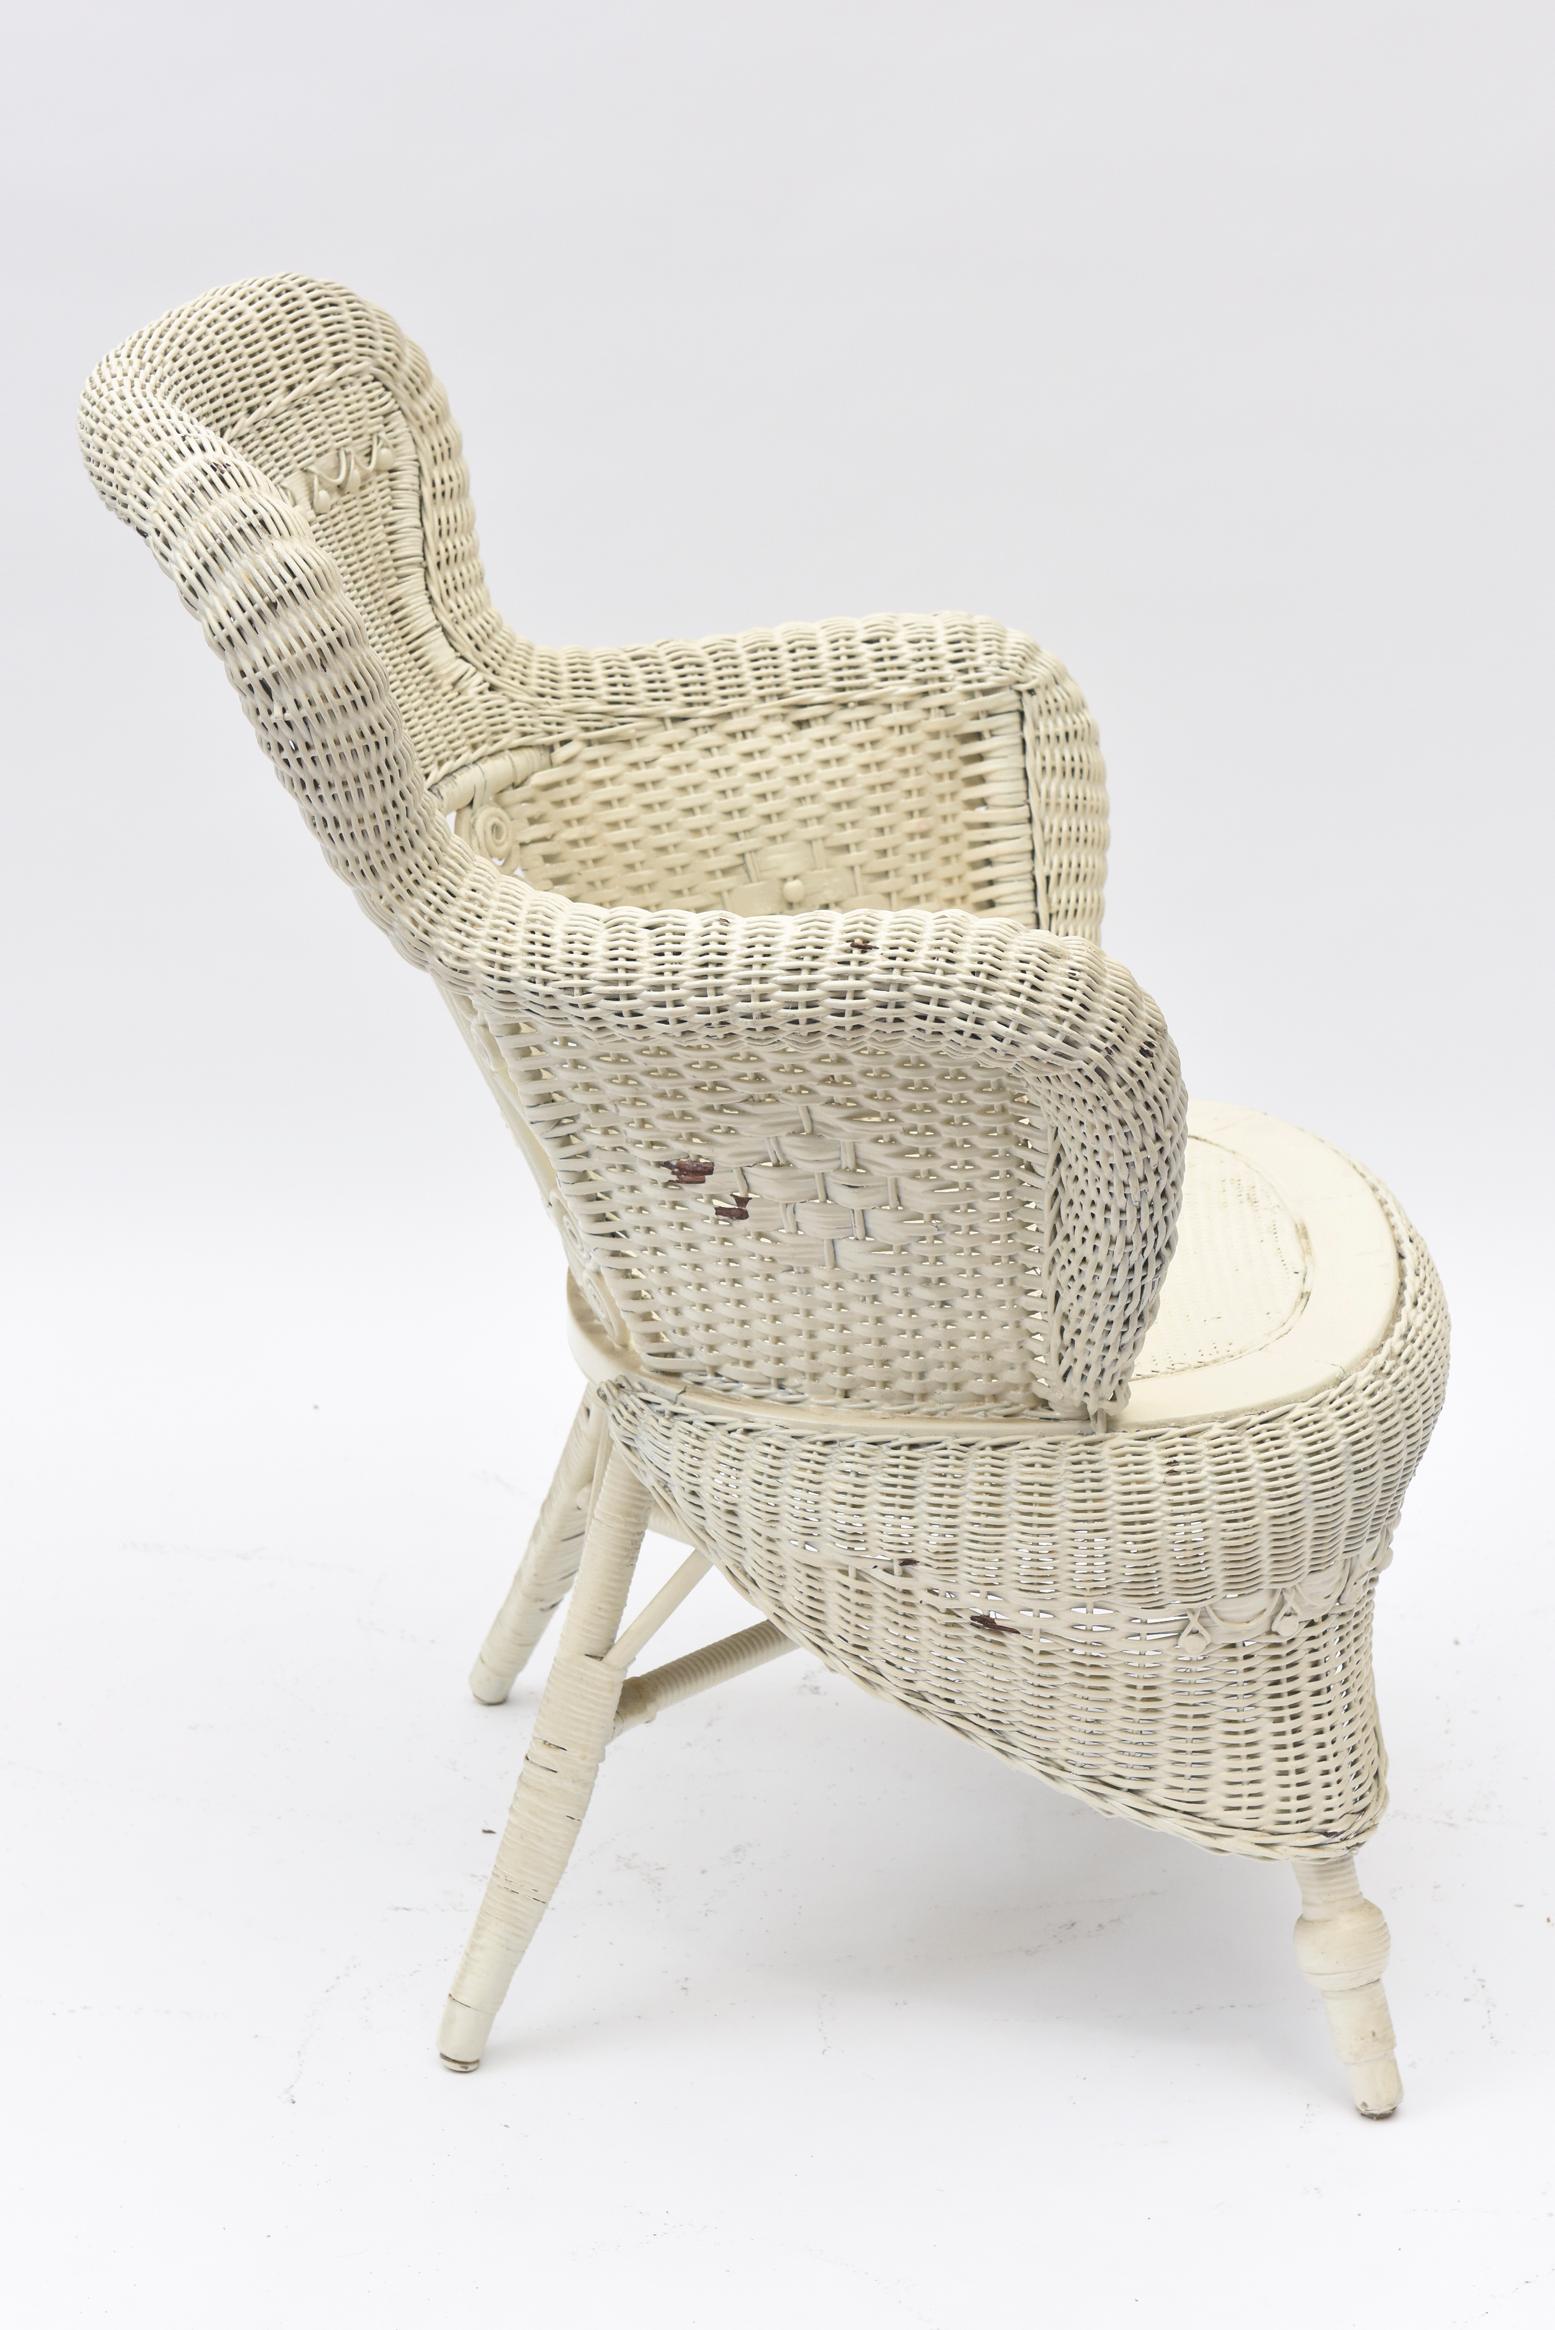 American Victorian Wicker Parlor Set ‘His, Her and Child's’ Chairs, Settee and Rocker For Sale